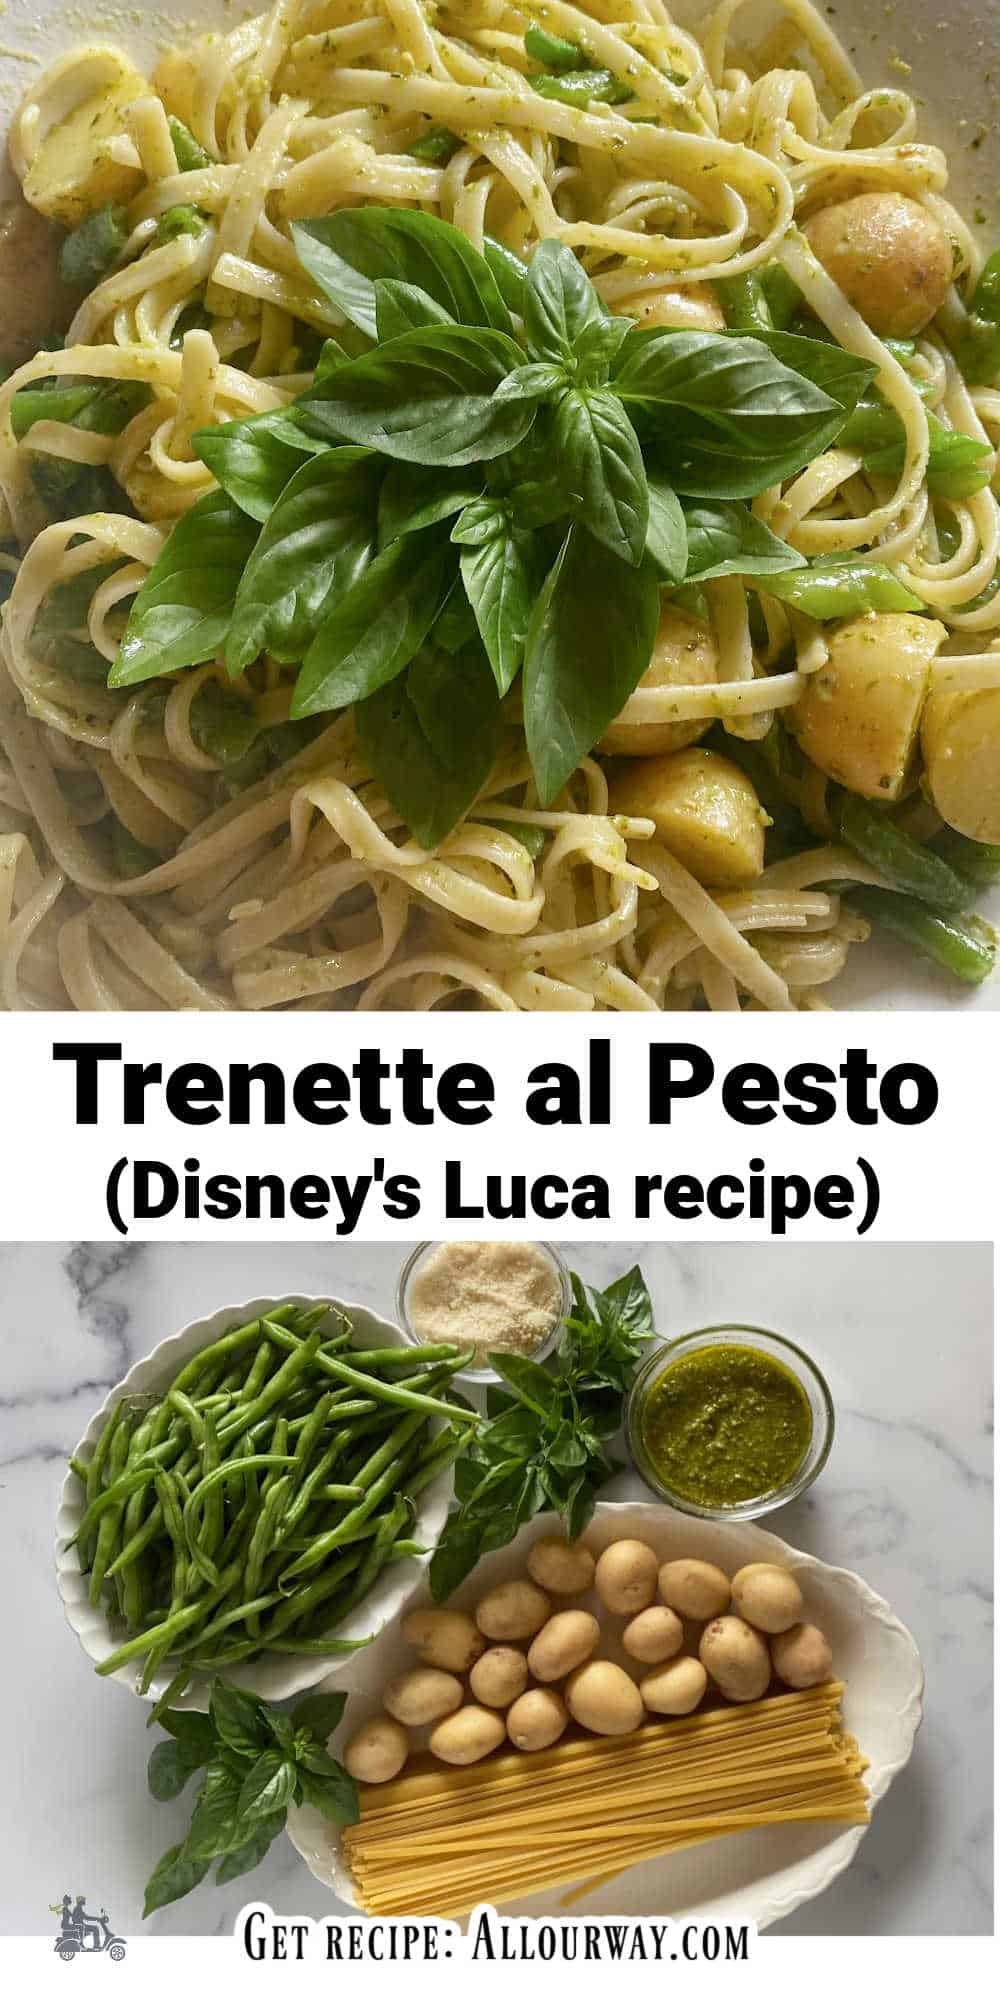 A collage featuring the Trenette al Pesto recipe and the ingredients needed to make it with a title overly.